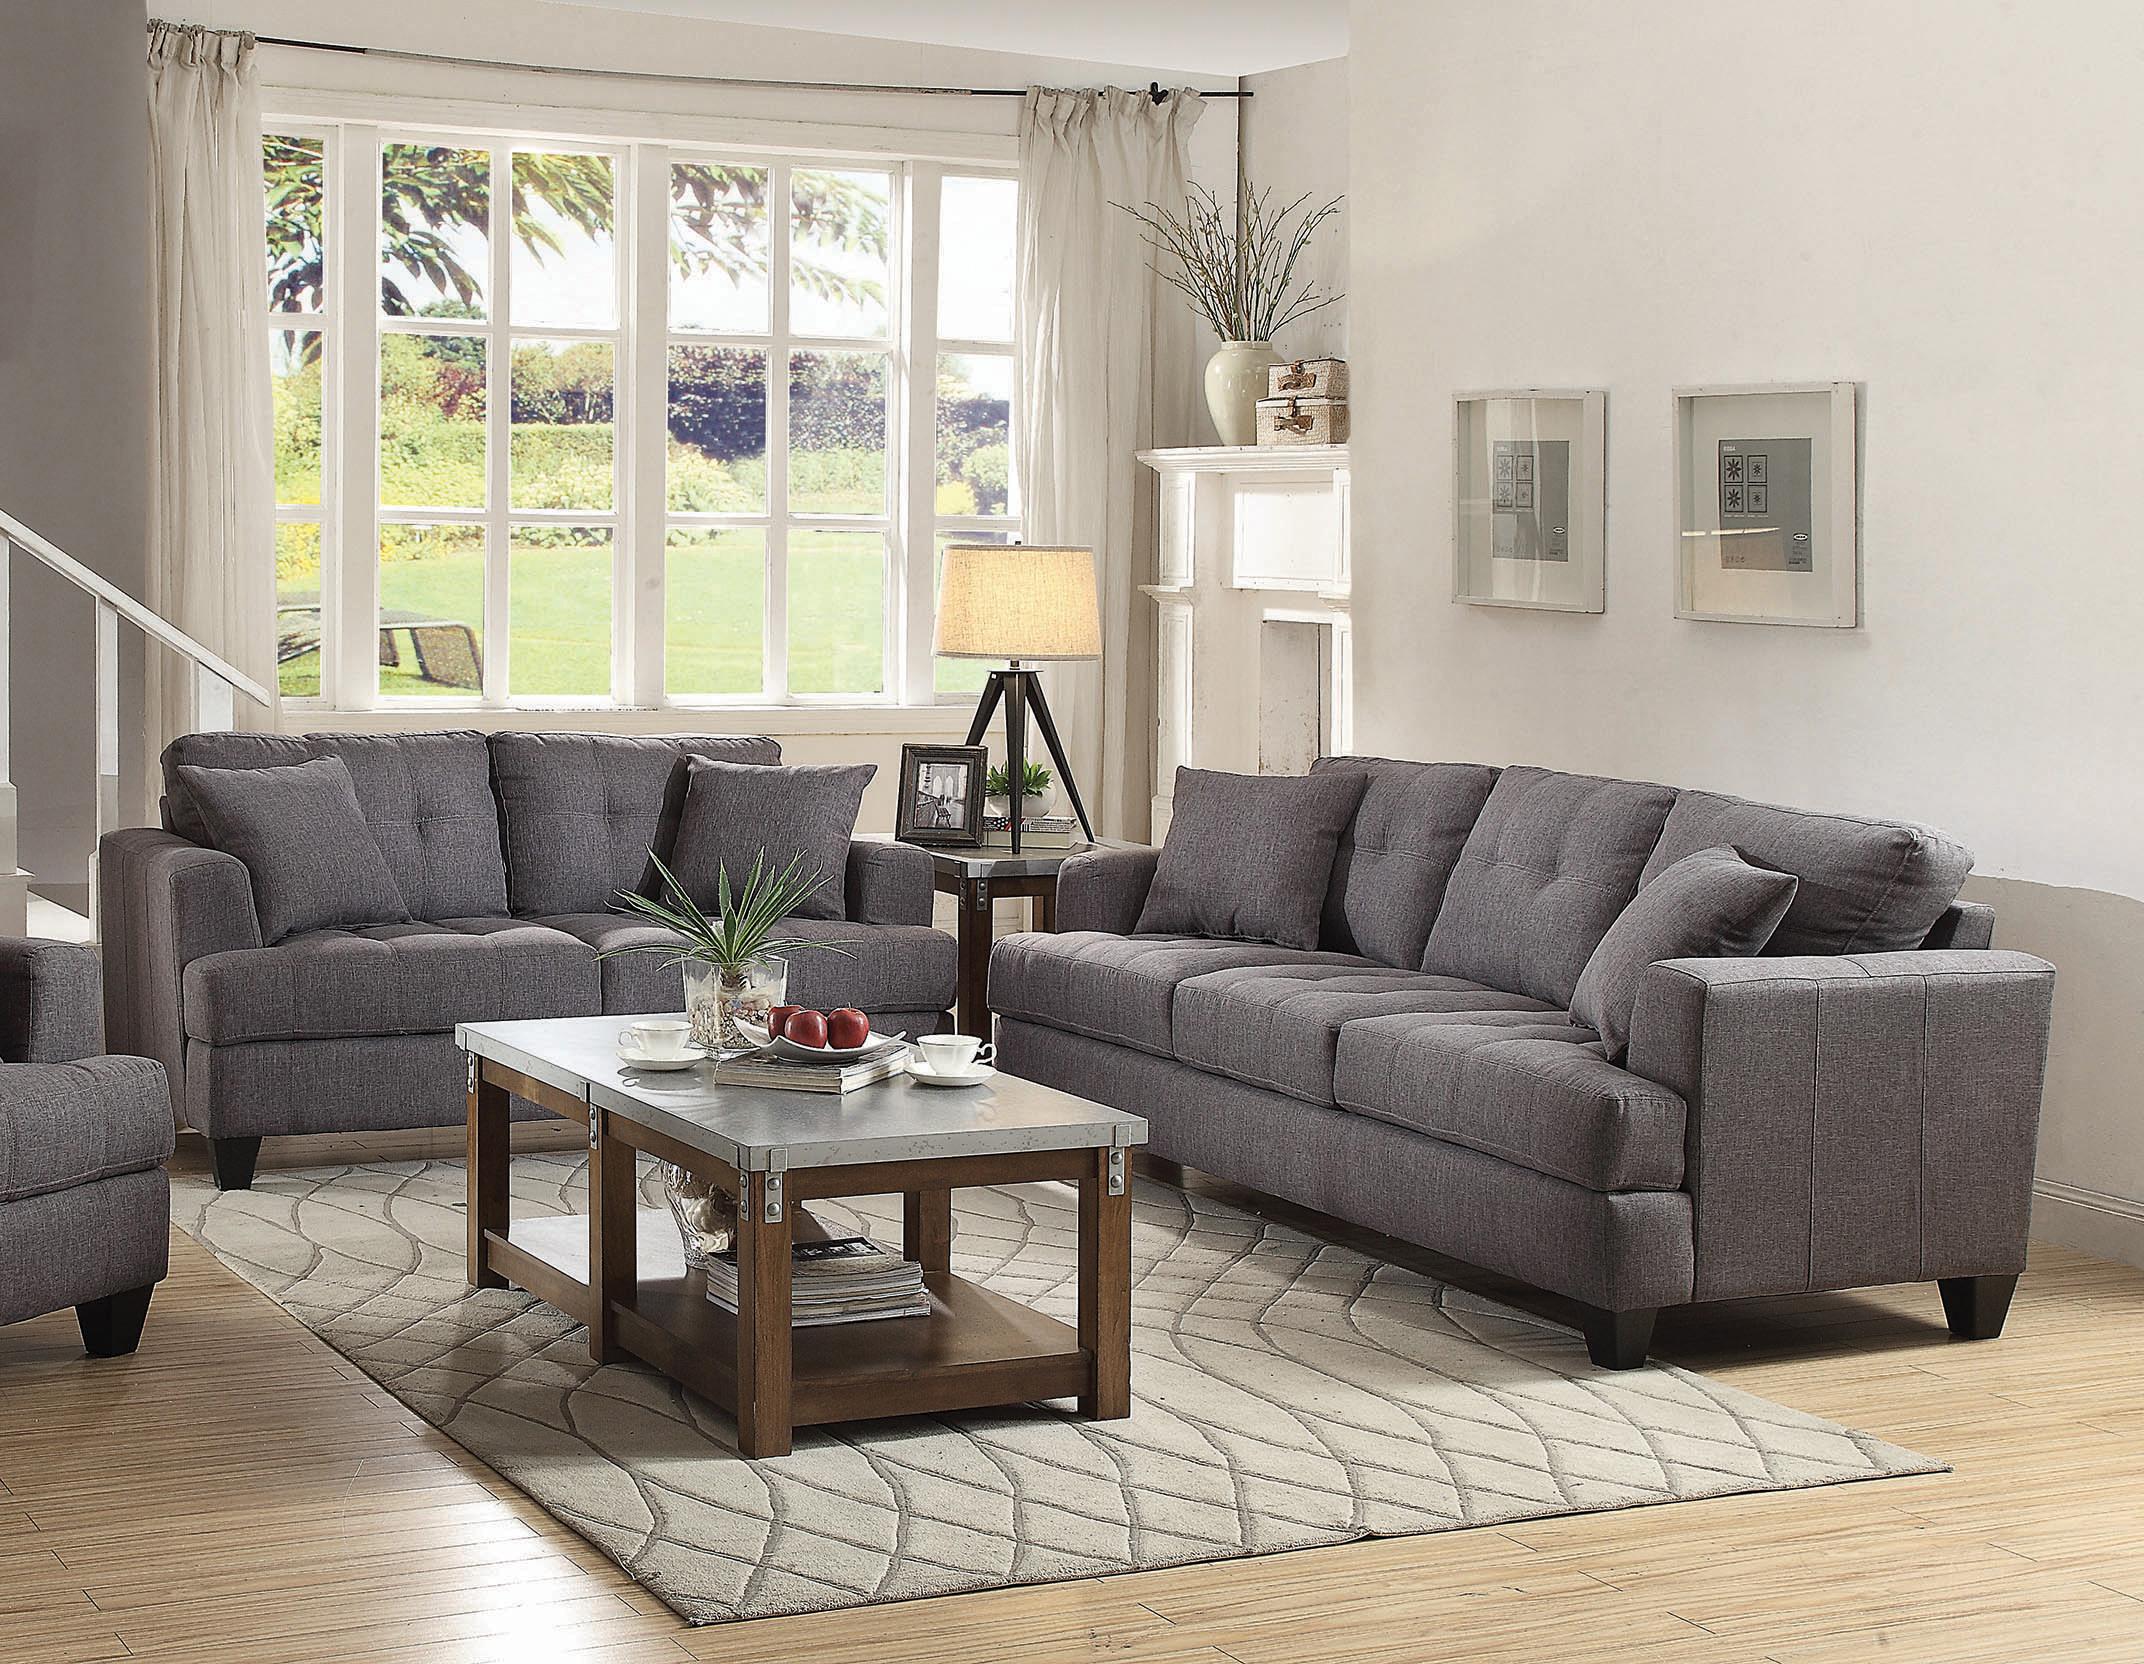 Transitional Living Room Set 505175-S2 Samuel 505175-S2 in Charcoal 